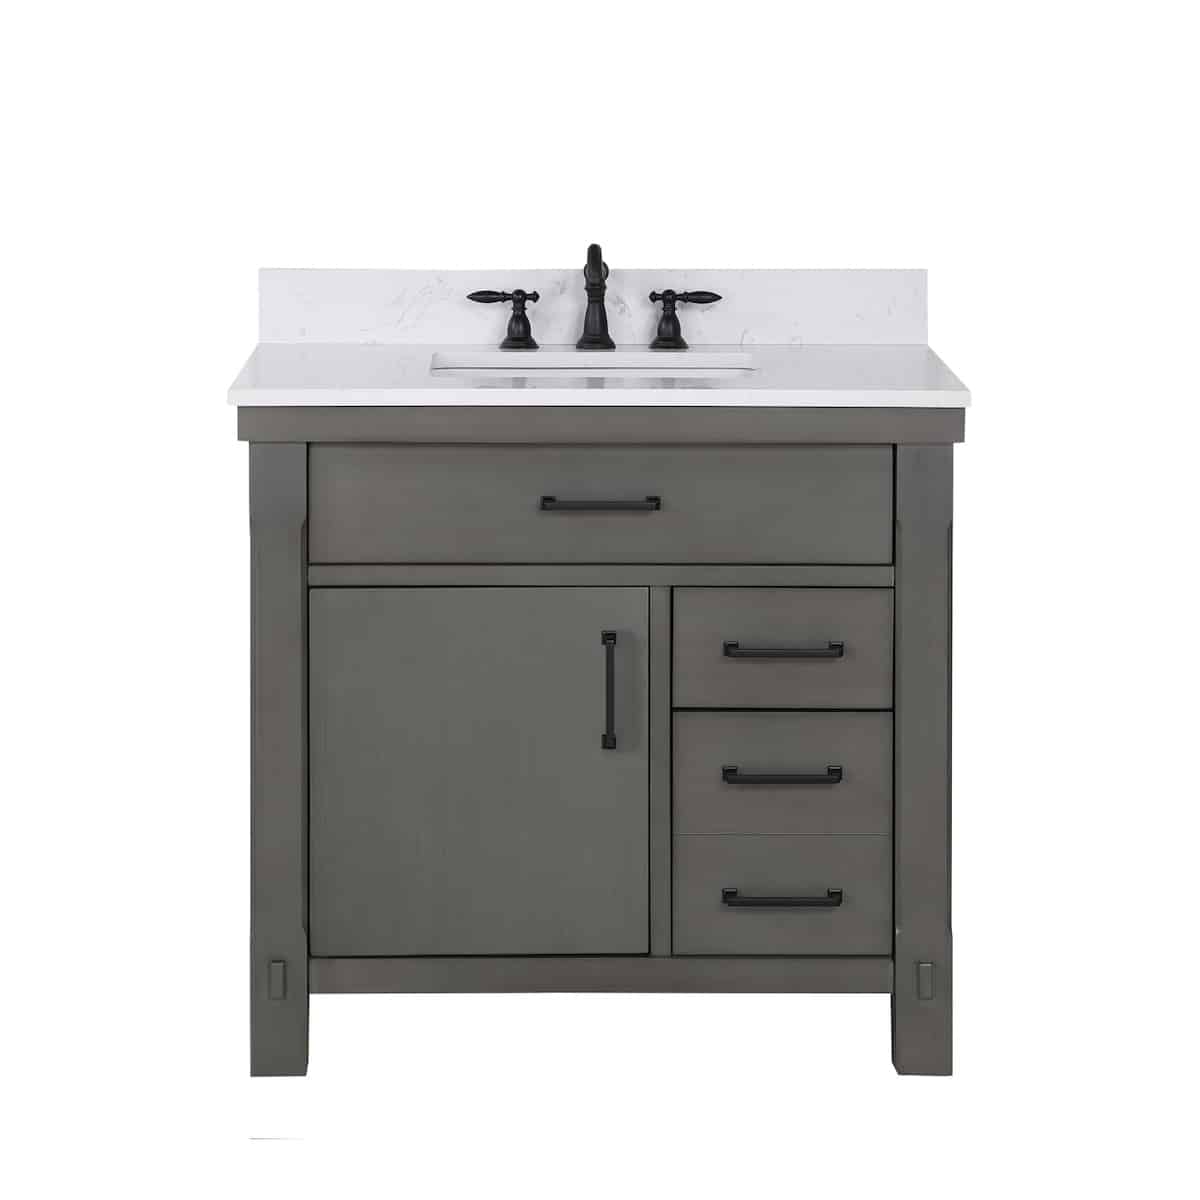 Vinnova Viella 36 Inch Freestanding Single Sink Bath Vanity in Rust Grey Finish with White Composite Countertop Without Mirror 701836-RU-WS-NM